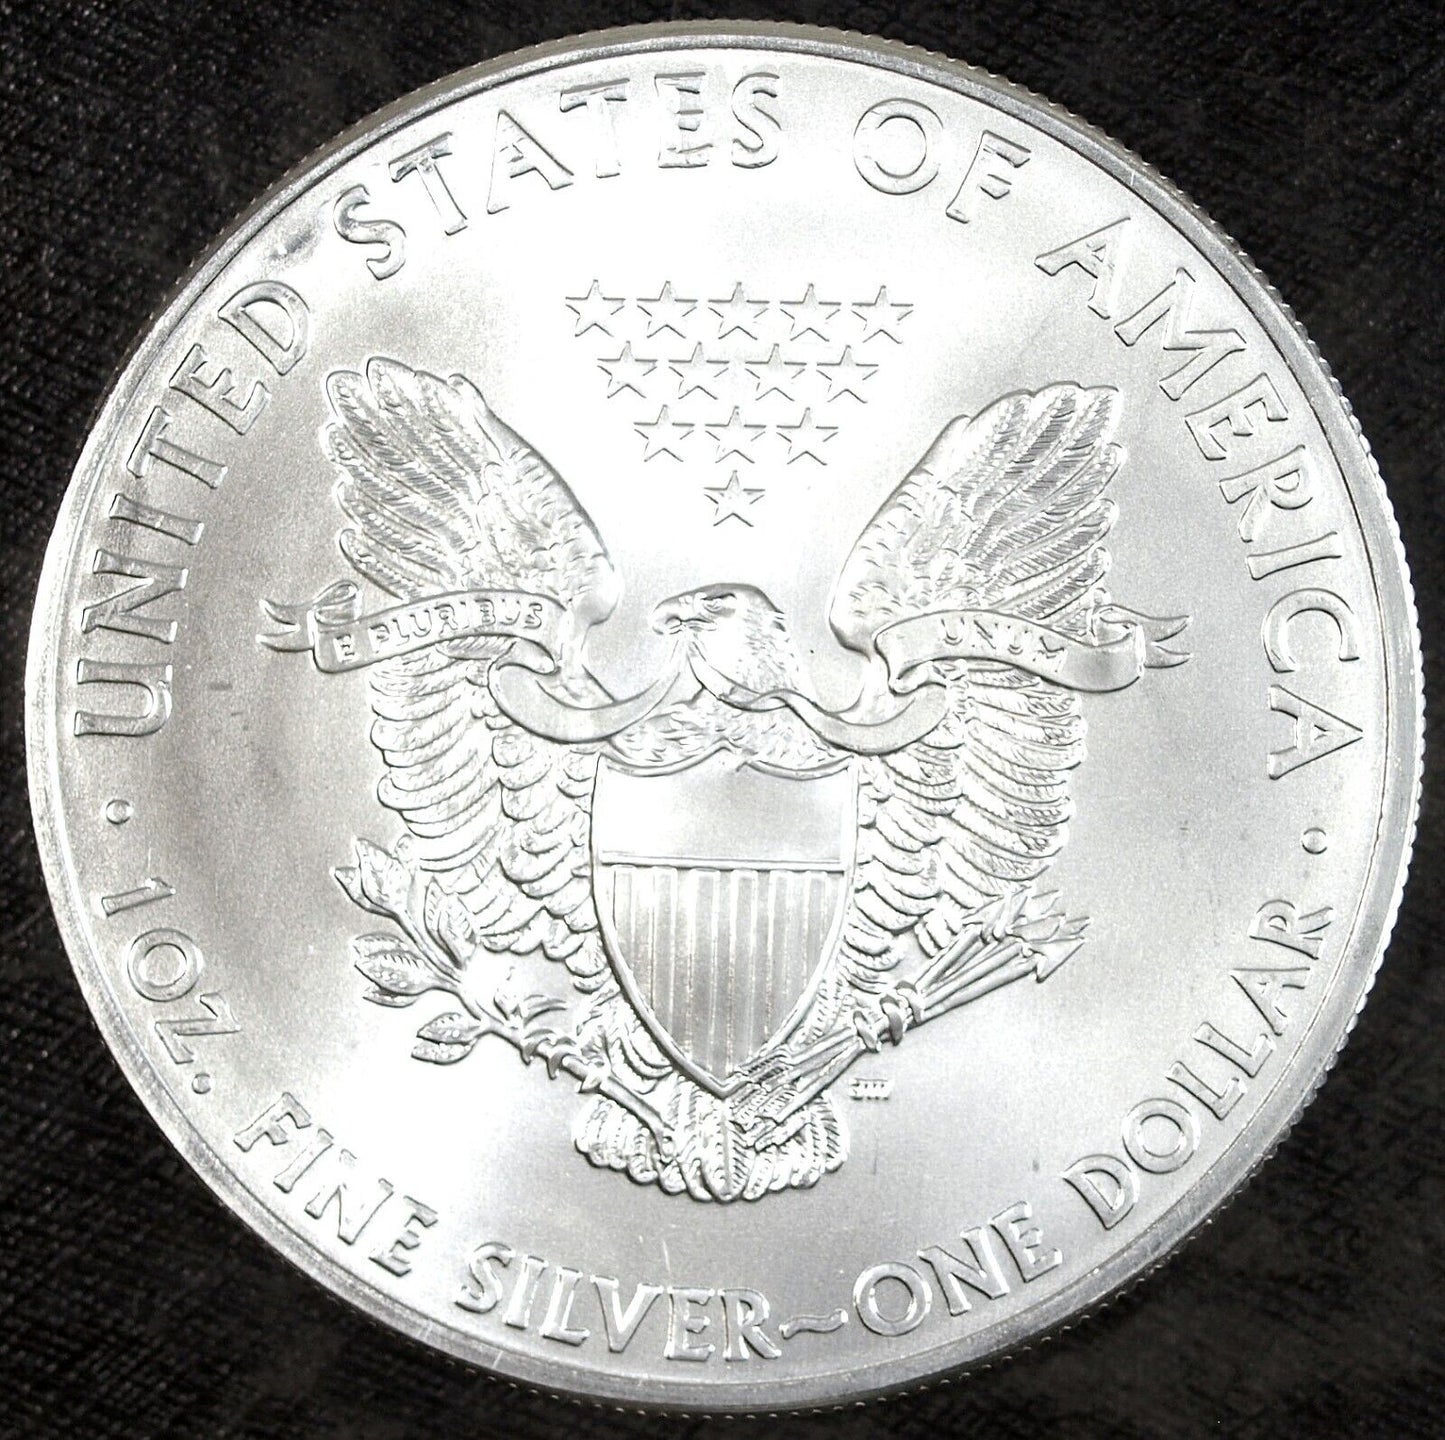 2012 American Silver Eagle ☆☆ Uncirculated ☆☆ Great Collectible 123